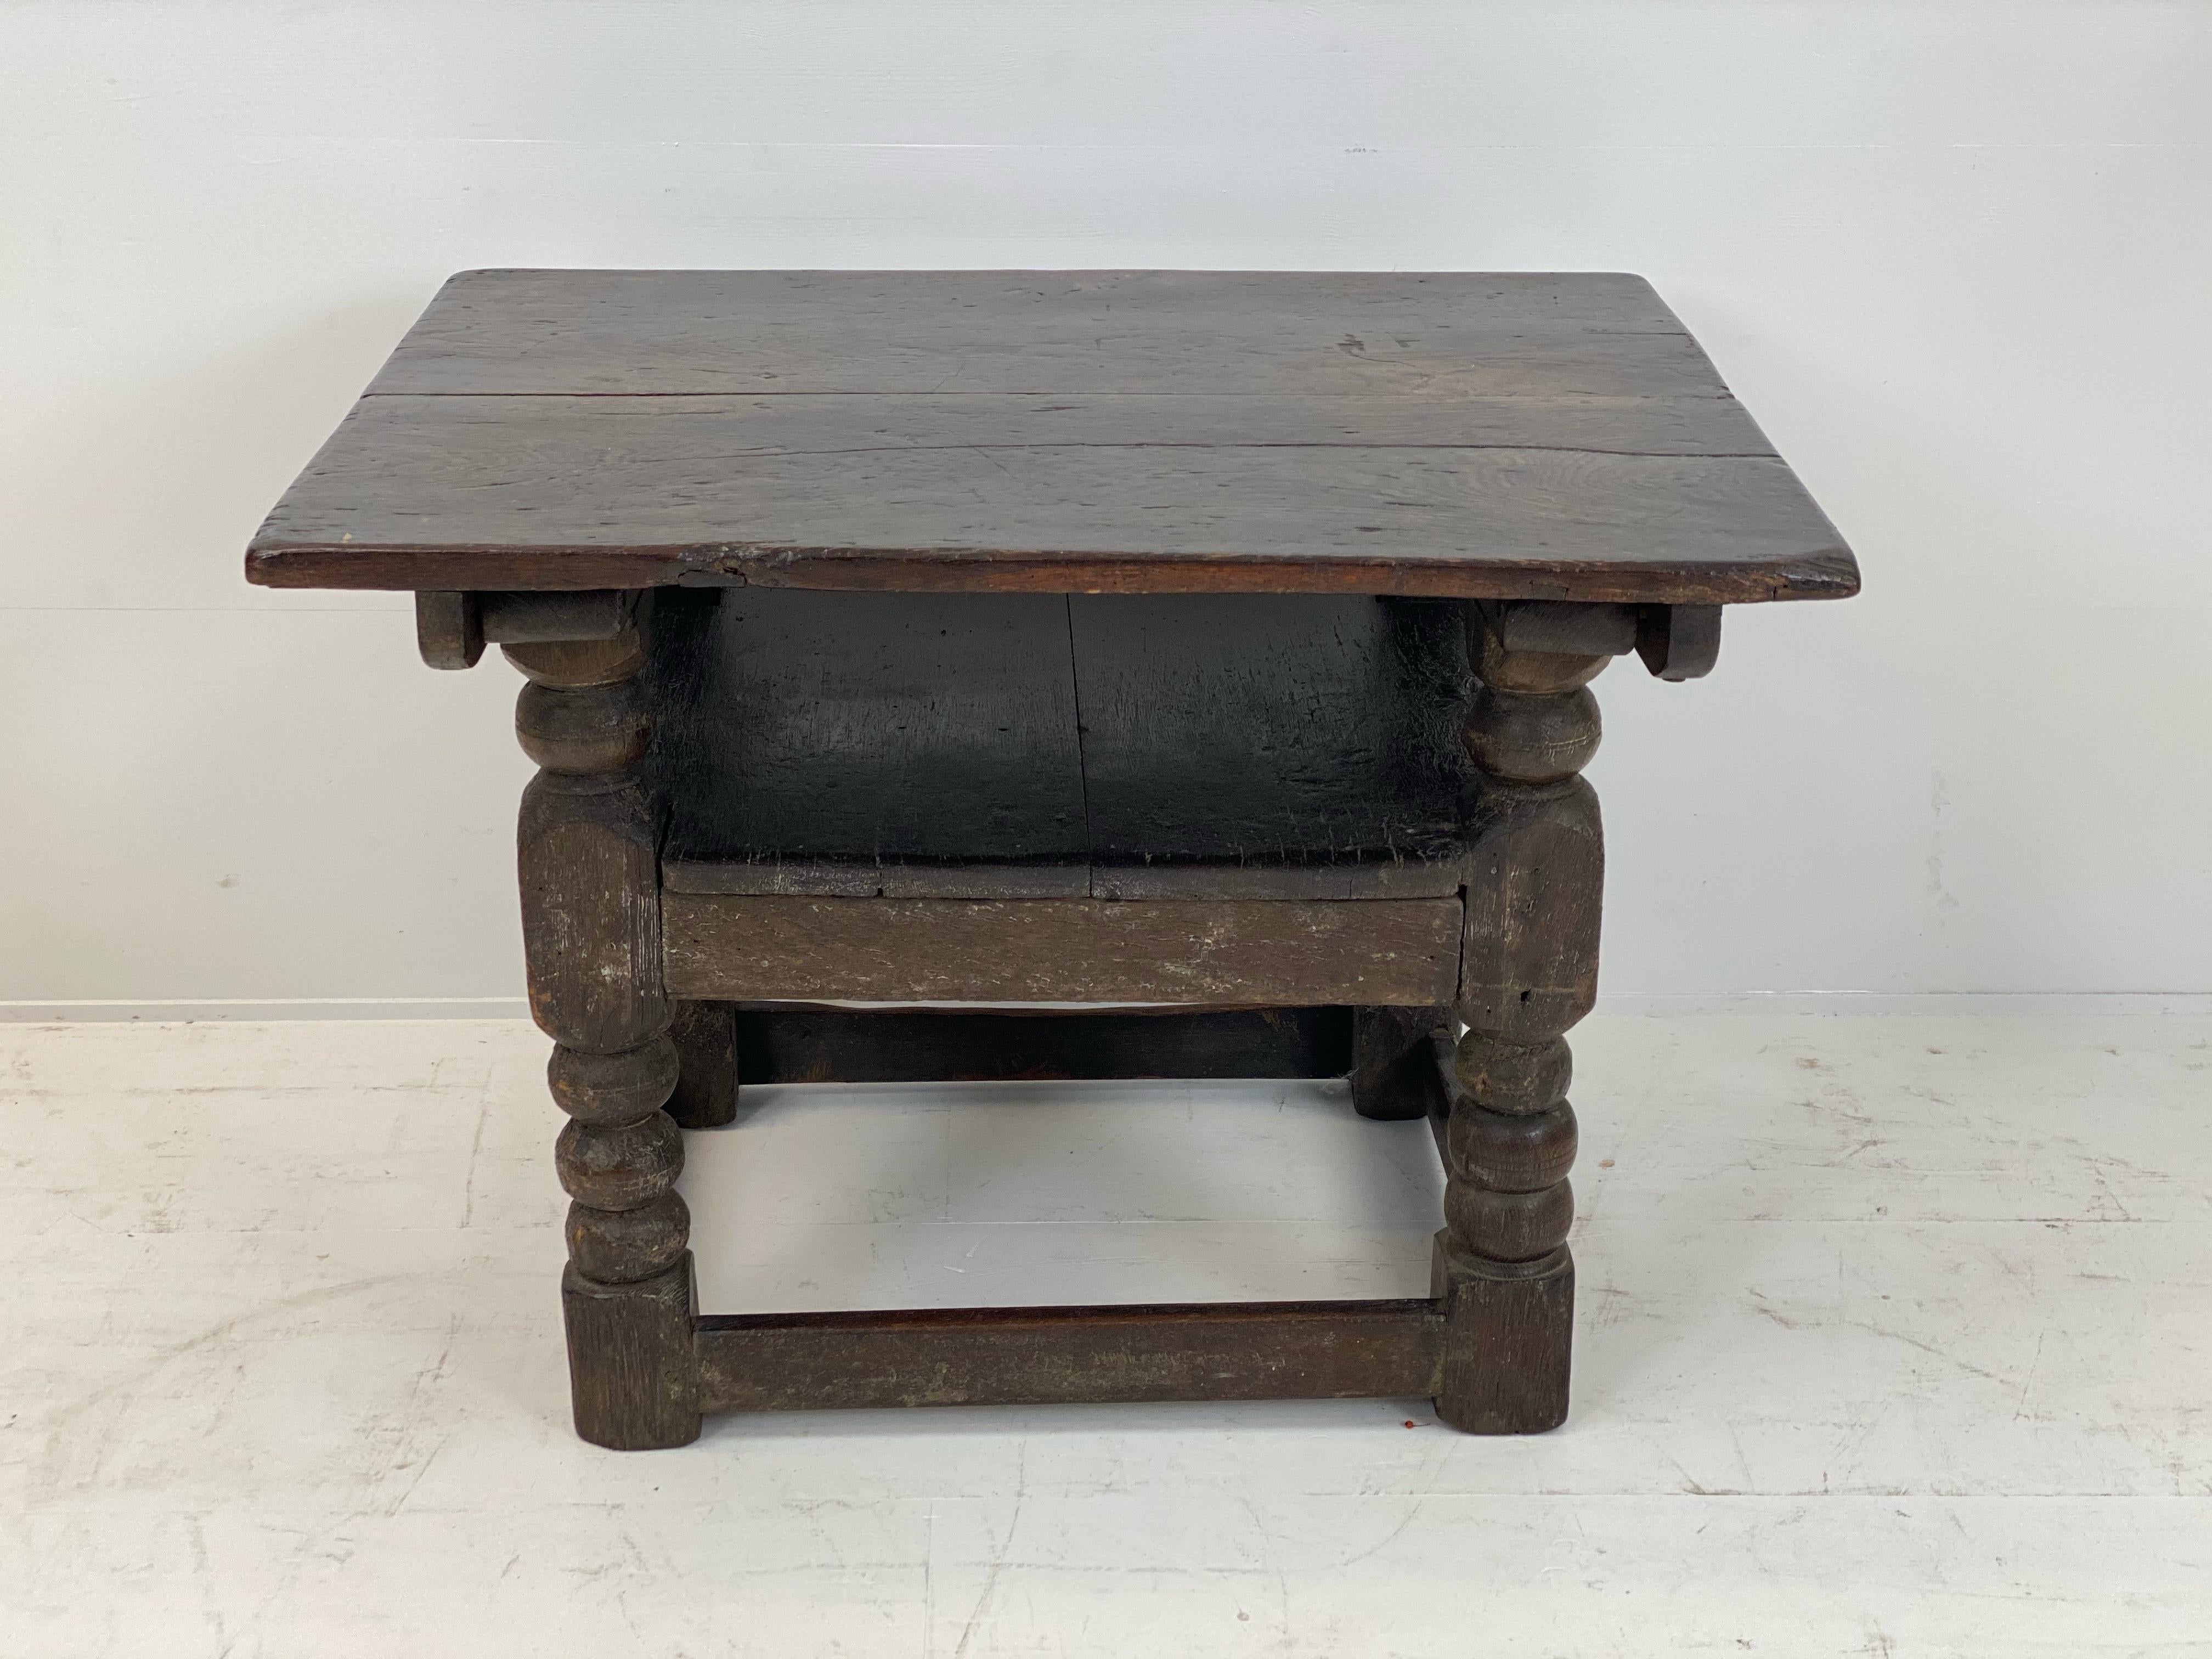 Superbe Antique English Oak Refectory Table,
convertible into a chair,
Wonderful patina,warm and worn finish,piece of furniture with great character,
early 18th century,
dark Brown tinted wood, a table full of charm and authenticity